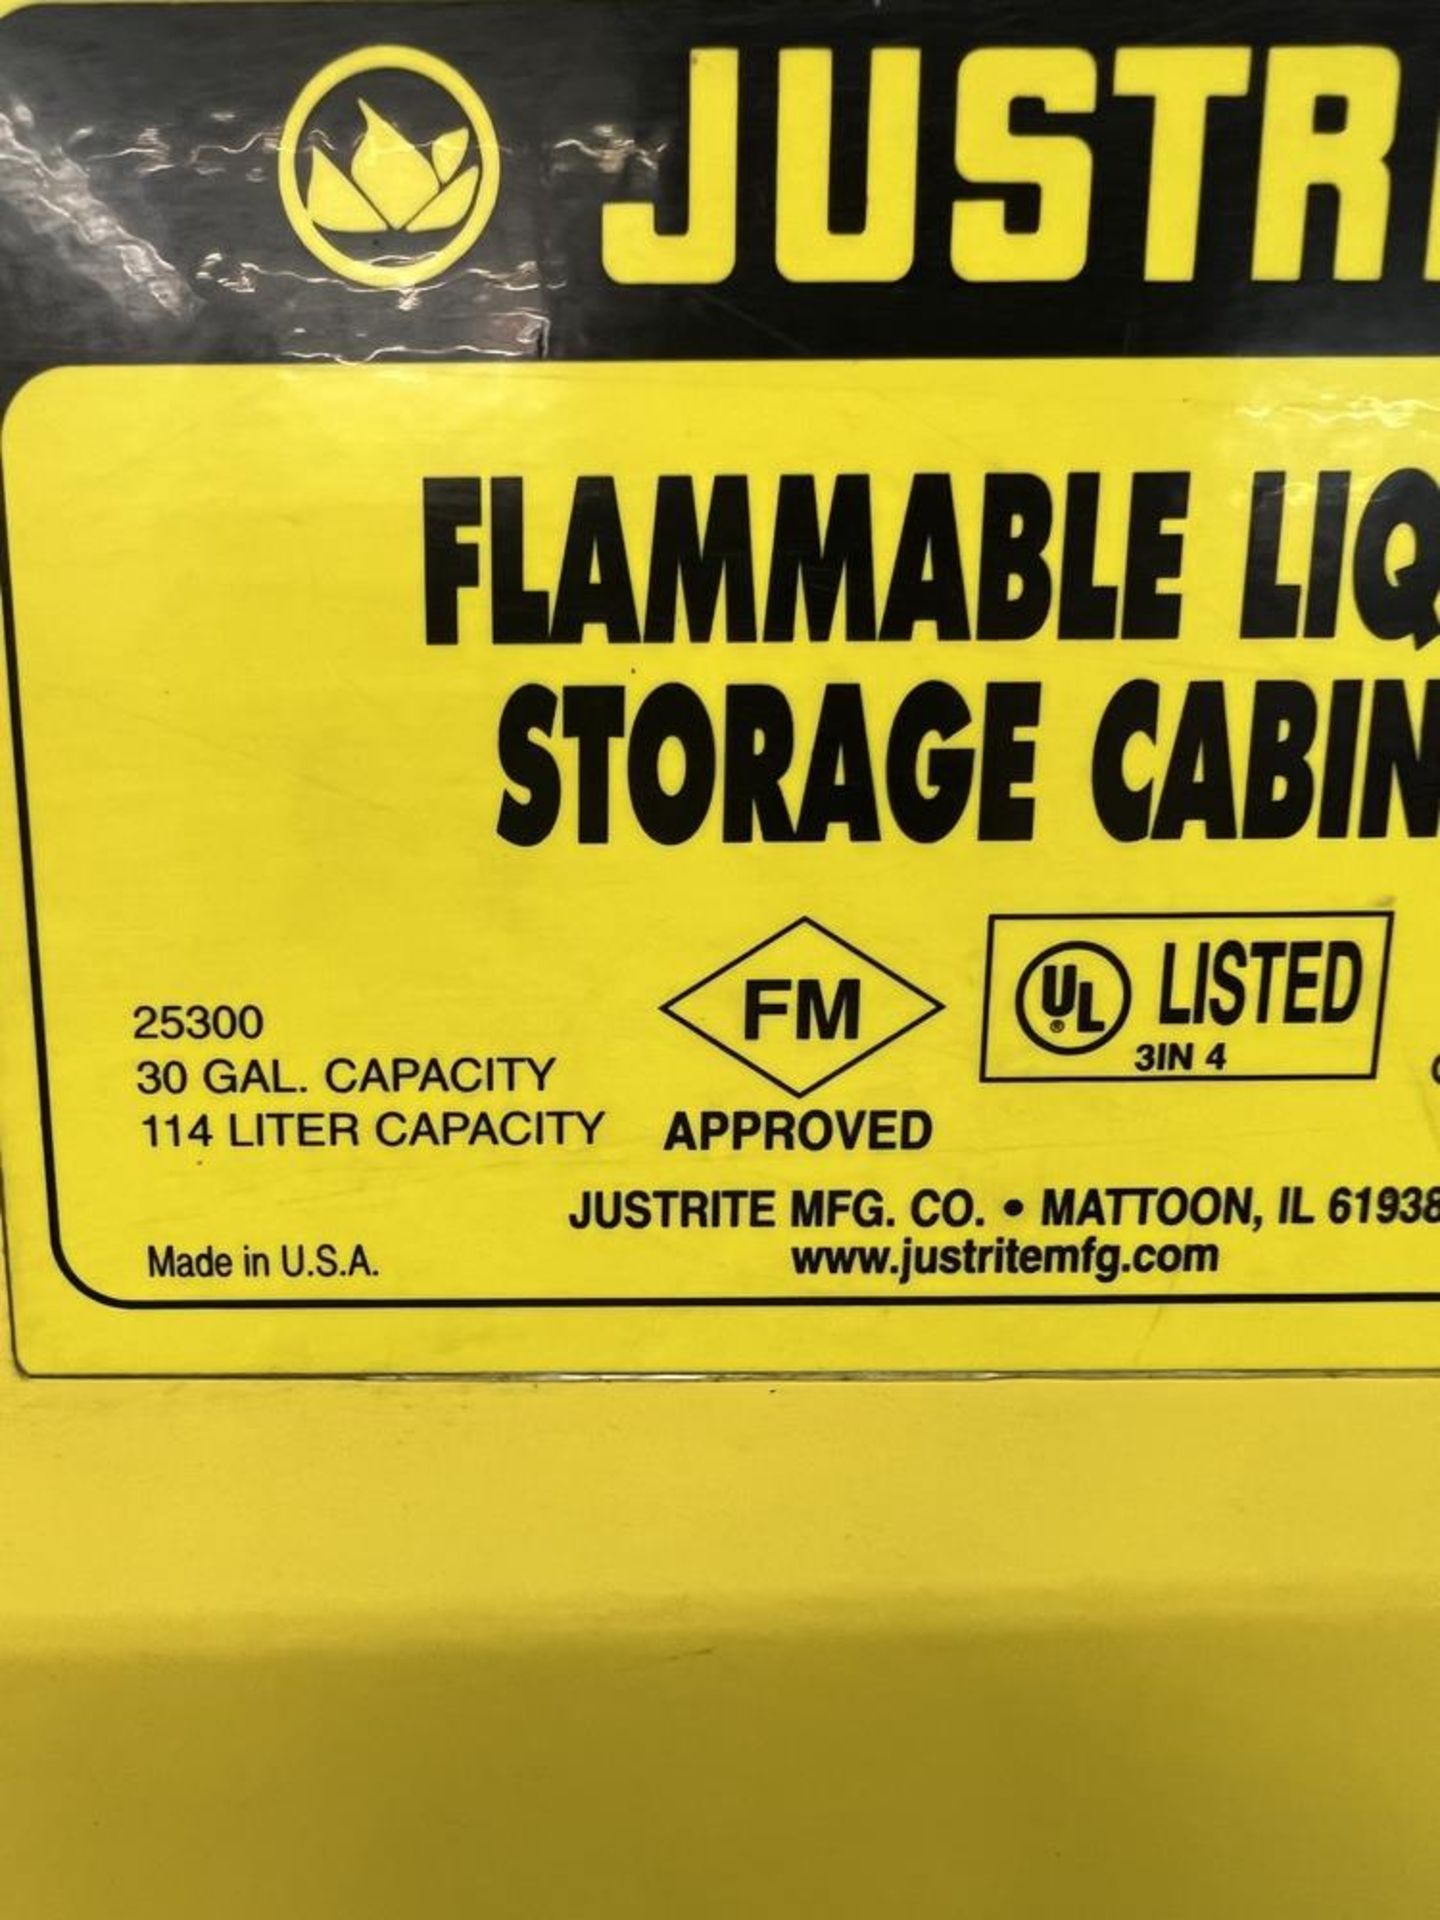 Just Rite 30 Gallon Capacity Flammable Liquid Storage Cabinet (No Contents) - Image 3 of 5